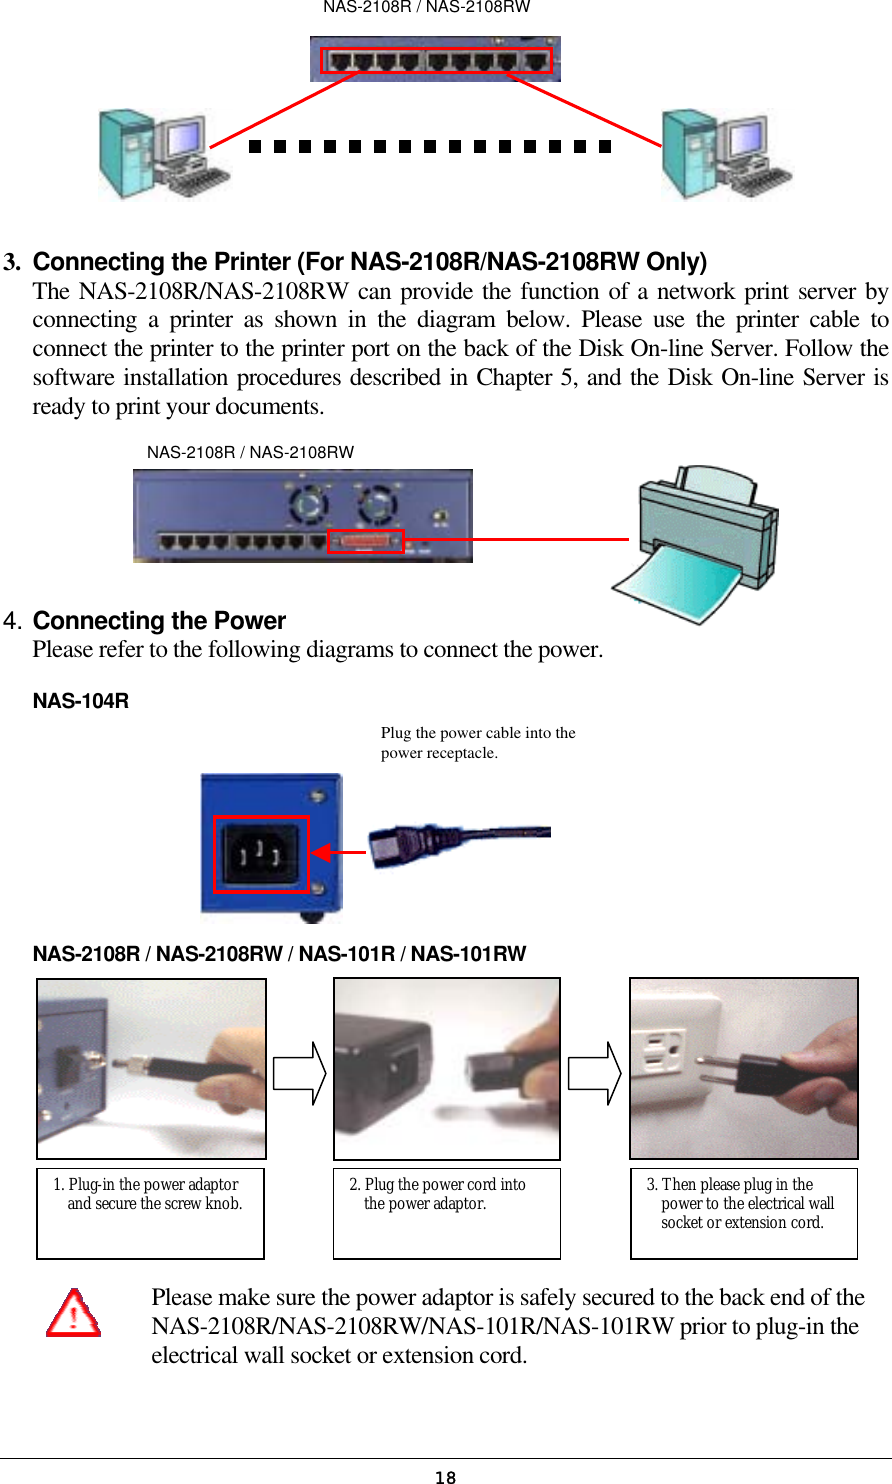   18Plug the power cable into the power receptacle.           3.  Connecting the Printer (For NAS-2108R/NAS-2108RW Only) The NAS-2108R/NAS-2108RW can provide the function of a network print server by connecting a printer as shown in the diagram below. Please use the printer cable to connect the printer to the printer port on the back of the Disk On-line Server. Follow the software installation procedures described in Chapter 5, and the Disk On-line Server is ready to print your documents.    4. Connecting the Power Please refer to the following diagrams to connect the power. NAS-104R         NAS-2108R / NAS-2108RW / NAS-101R / NAS-101RW            Please make sure the power adaptor is safely secured to the back end of the NAS-2108R/NAS-2108RW/NAS-101R/NAS-101RW prior to plug-in the electrical wall socket or extension cord.   NAS-2108R / NAS-2108RW 1. Plug-in the power adaptor and secure the screw knob.  2. Plug the power cord into the power adaptor.  3. Then please plug in the power to the electrical wall socket or extension cord. NAS-2108R / NAS-2108RW